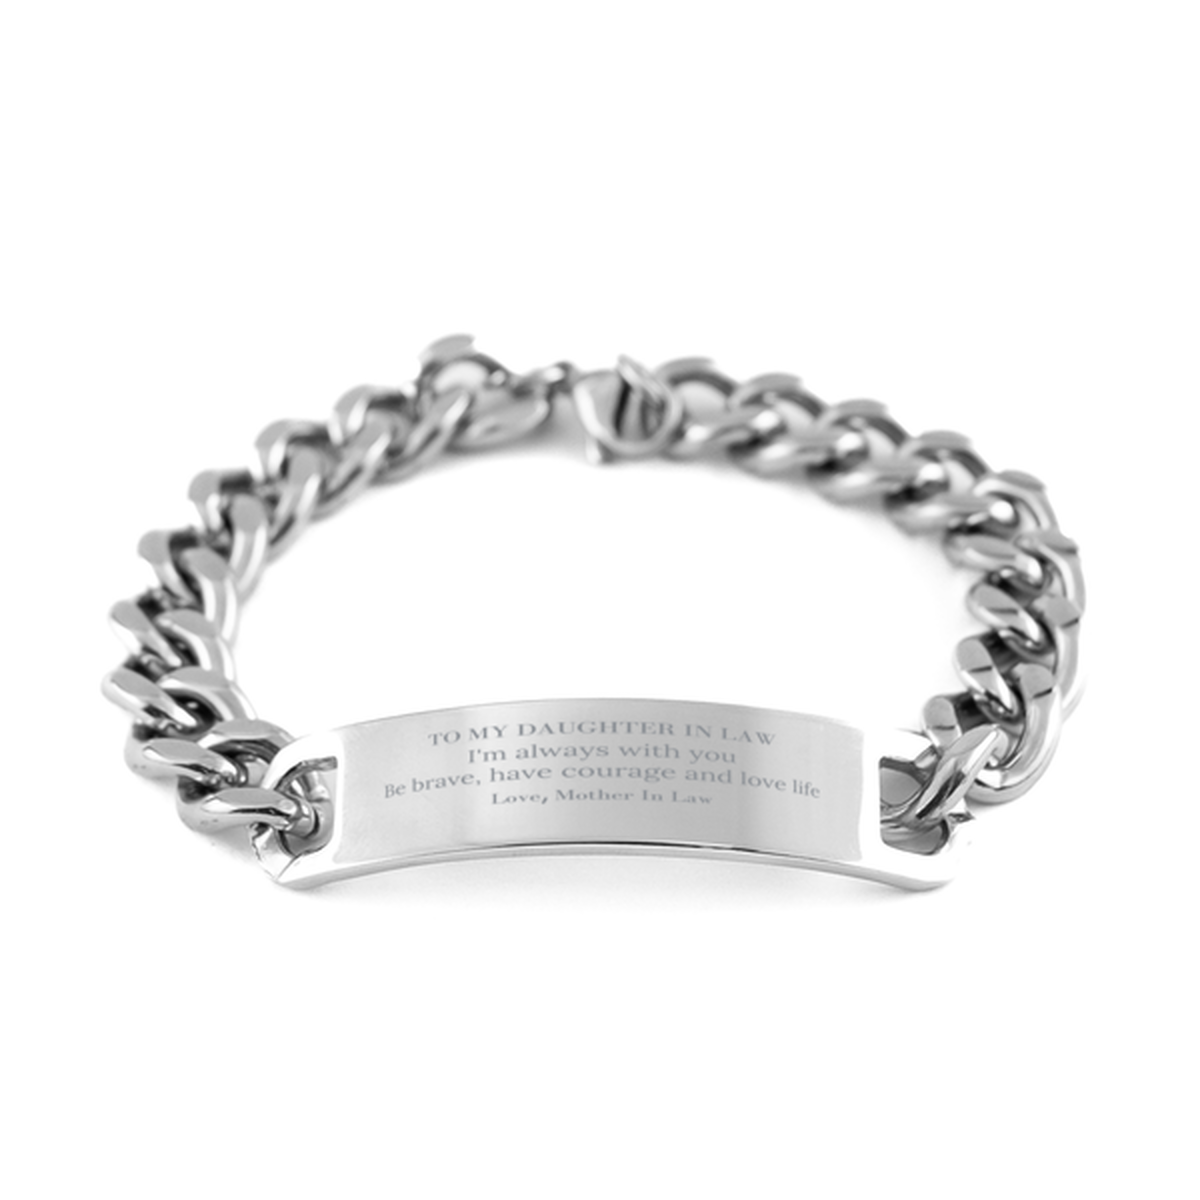 To My Daughter In Law Gifts from Mother In Law, Unique Cuban Chain Stainless Steel Bracelet Inspirational Christmas Birthday Graduation Gifts for Daughter In Law I'm always with you. Be brave, have courage and love life. Love, Mother In Law